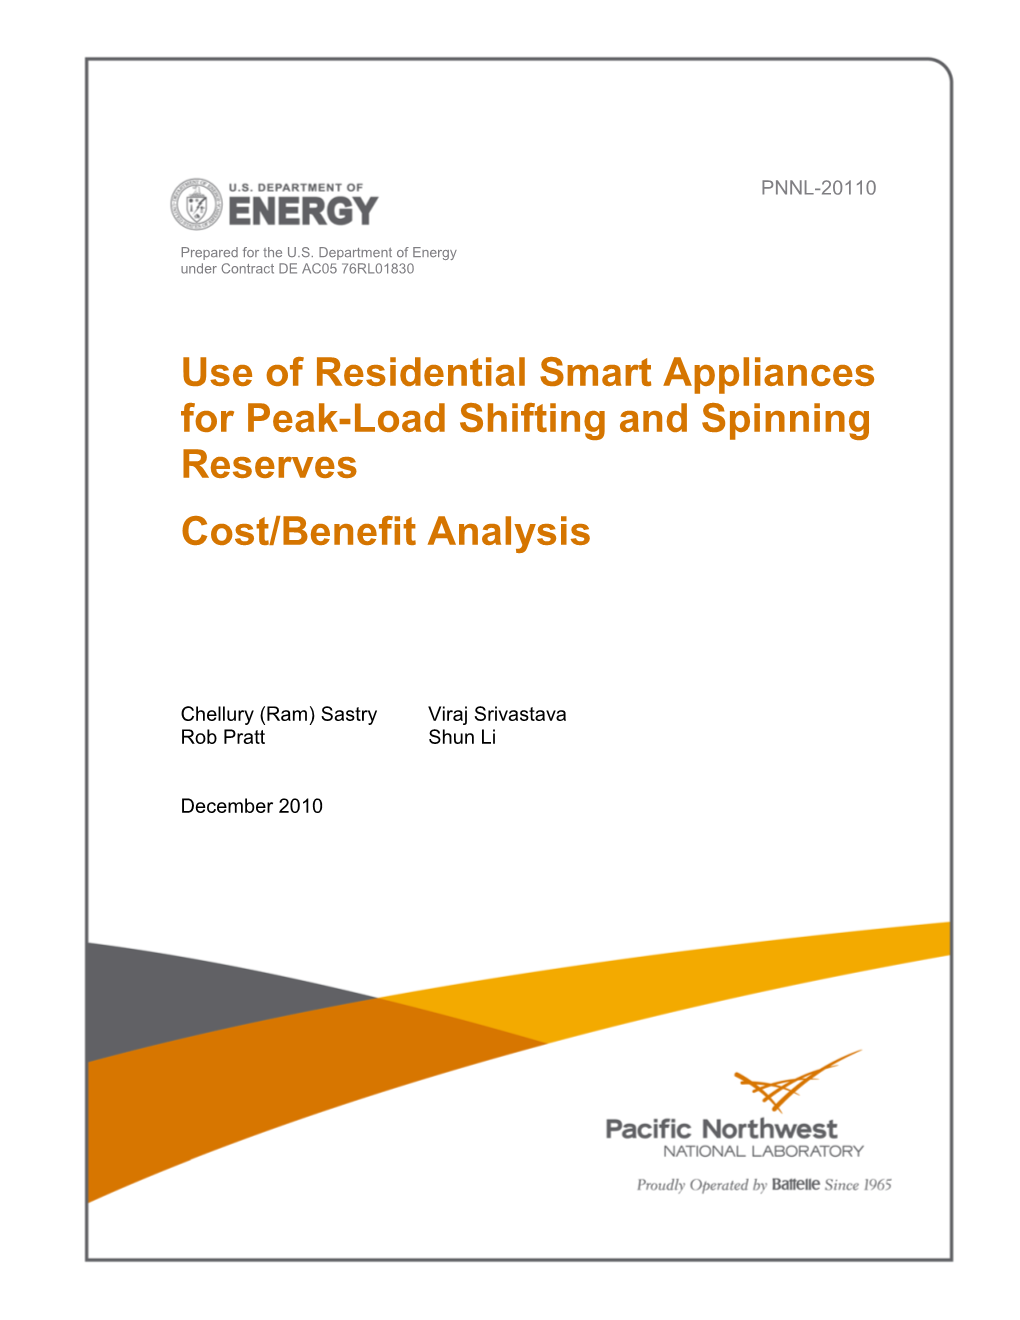 Use of Residential Smart Appliances for Peak-Load Shifting and Spinning Reserves